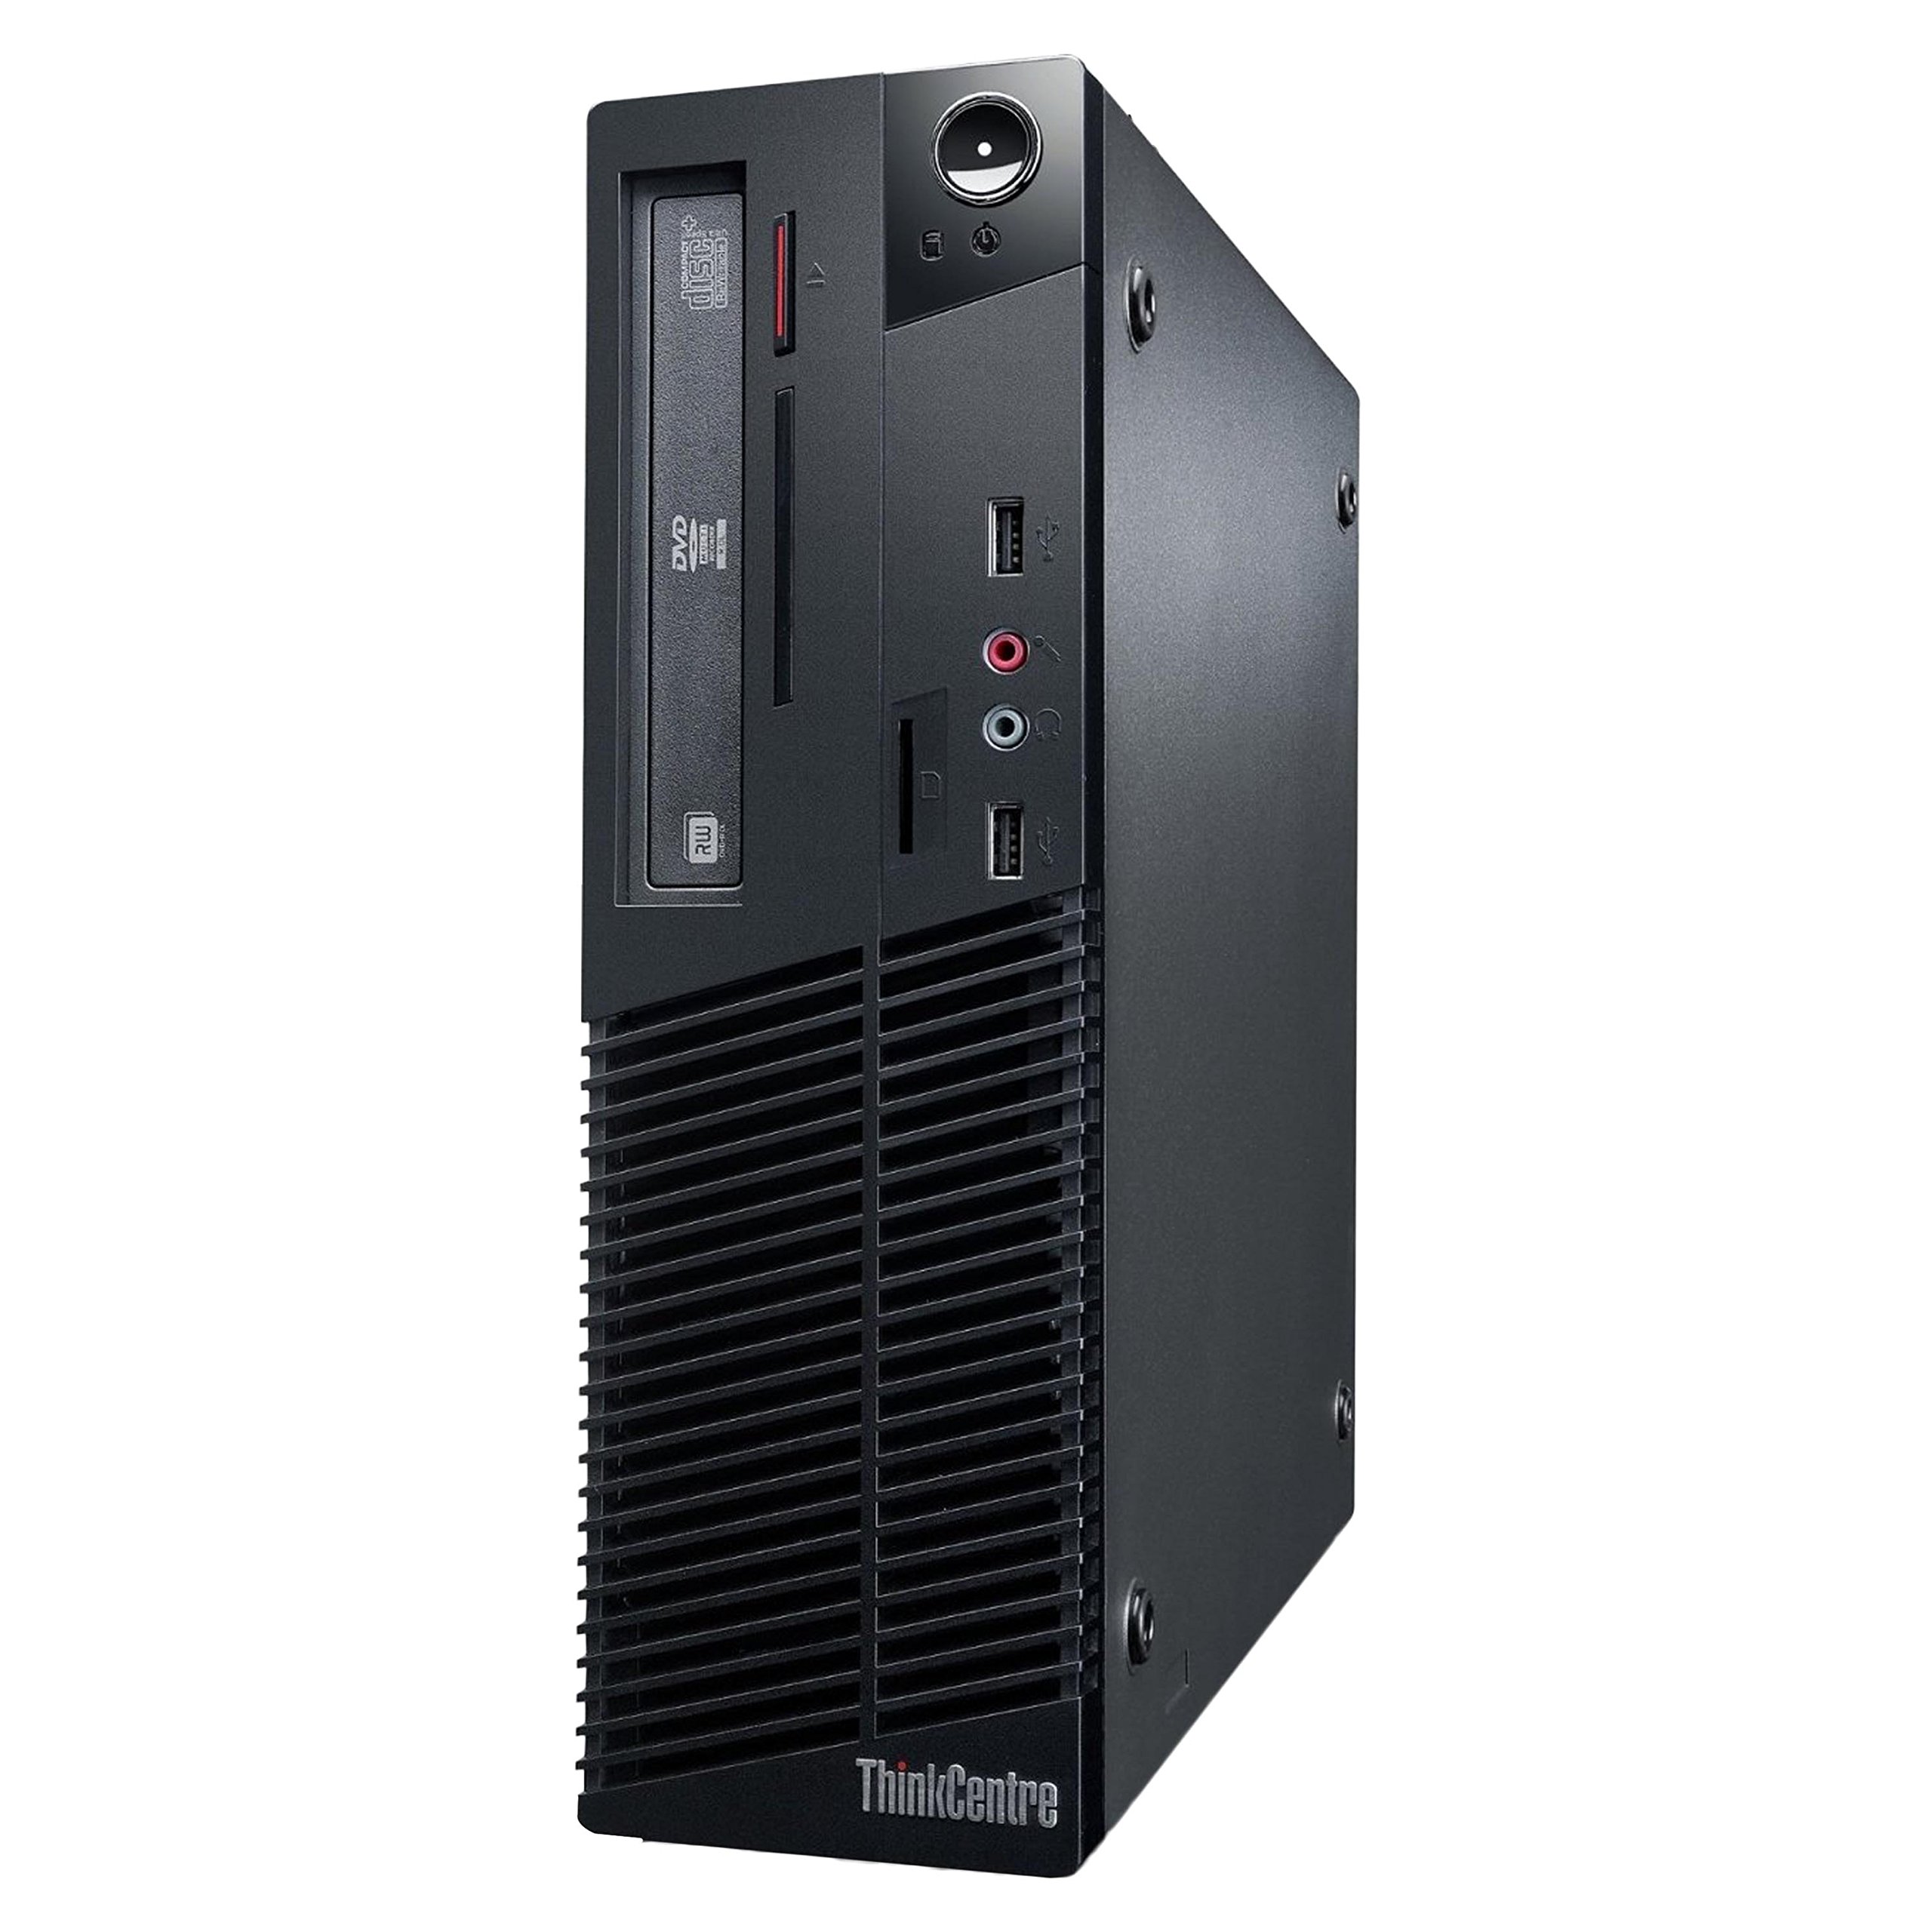 Lenovo ThinkCentre M79 SFF Business Desktop Computer, AMD A8-6500B up to 4.1GHz, 12G DDR3, 2T, DVD, WiFi, BT 4.0, USB 3.0, VGA, DP, Win 10 64-Bit Supports English/French/Spanish(A8)(Renewed)